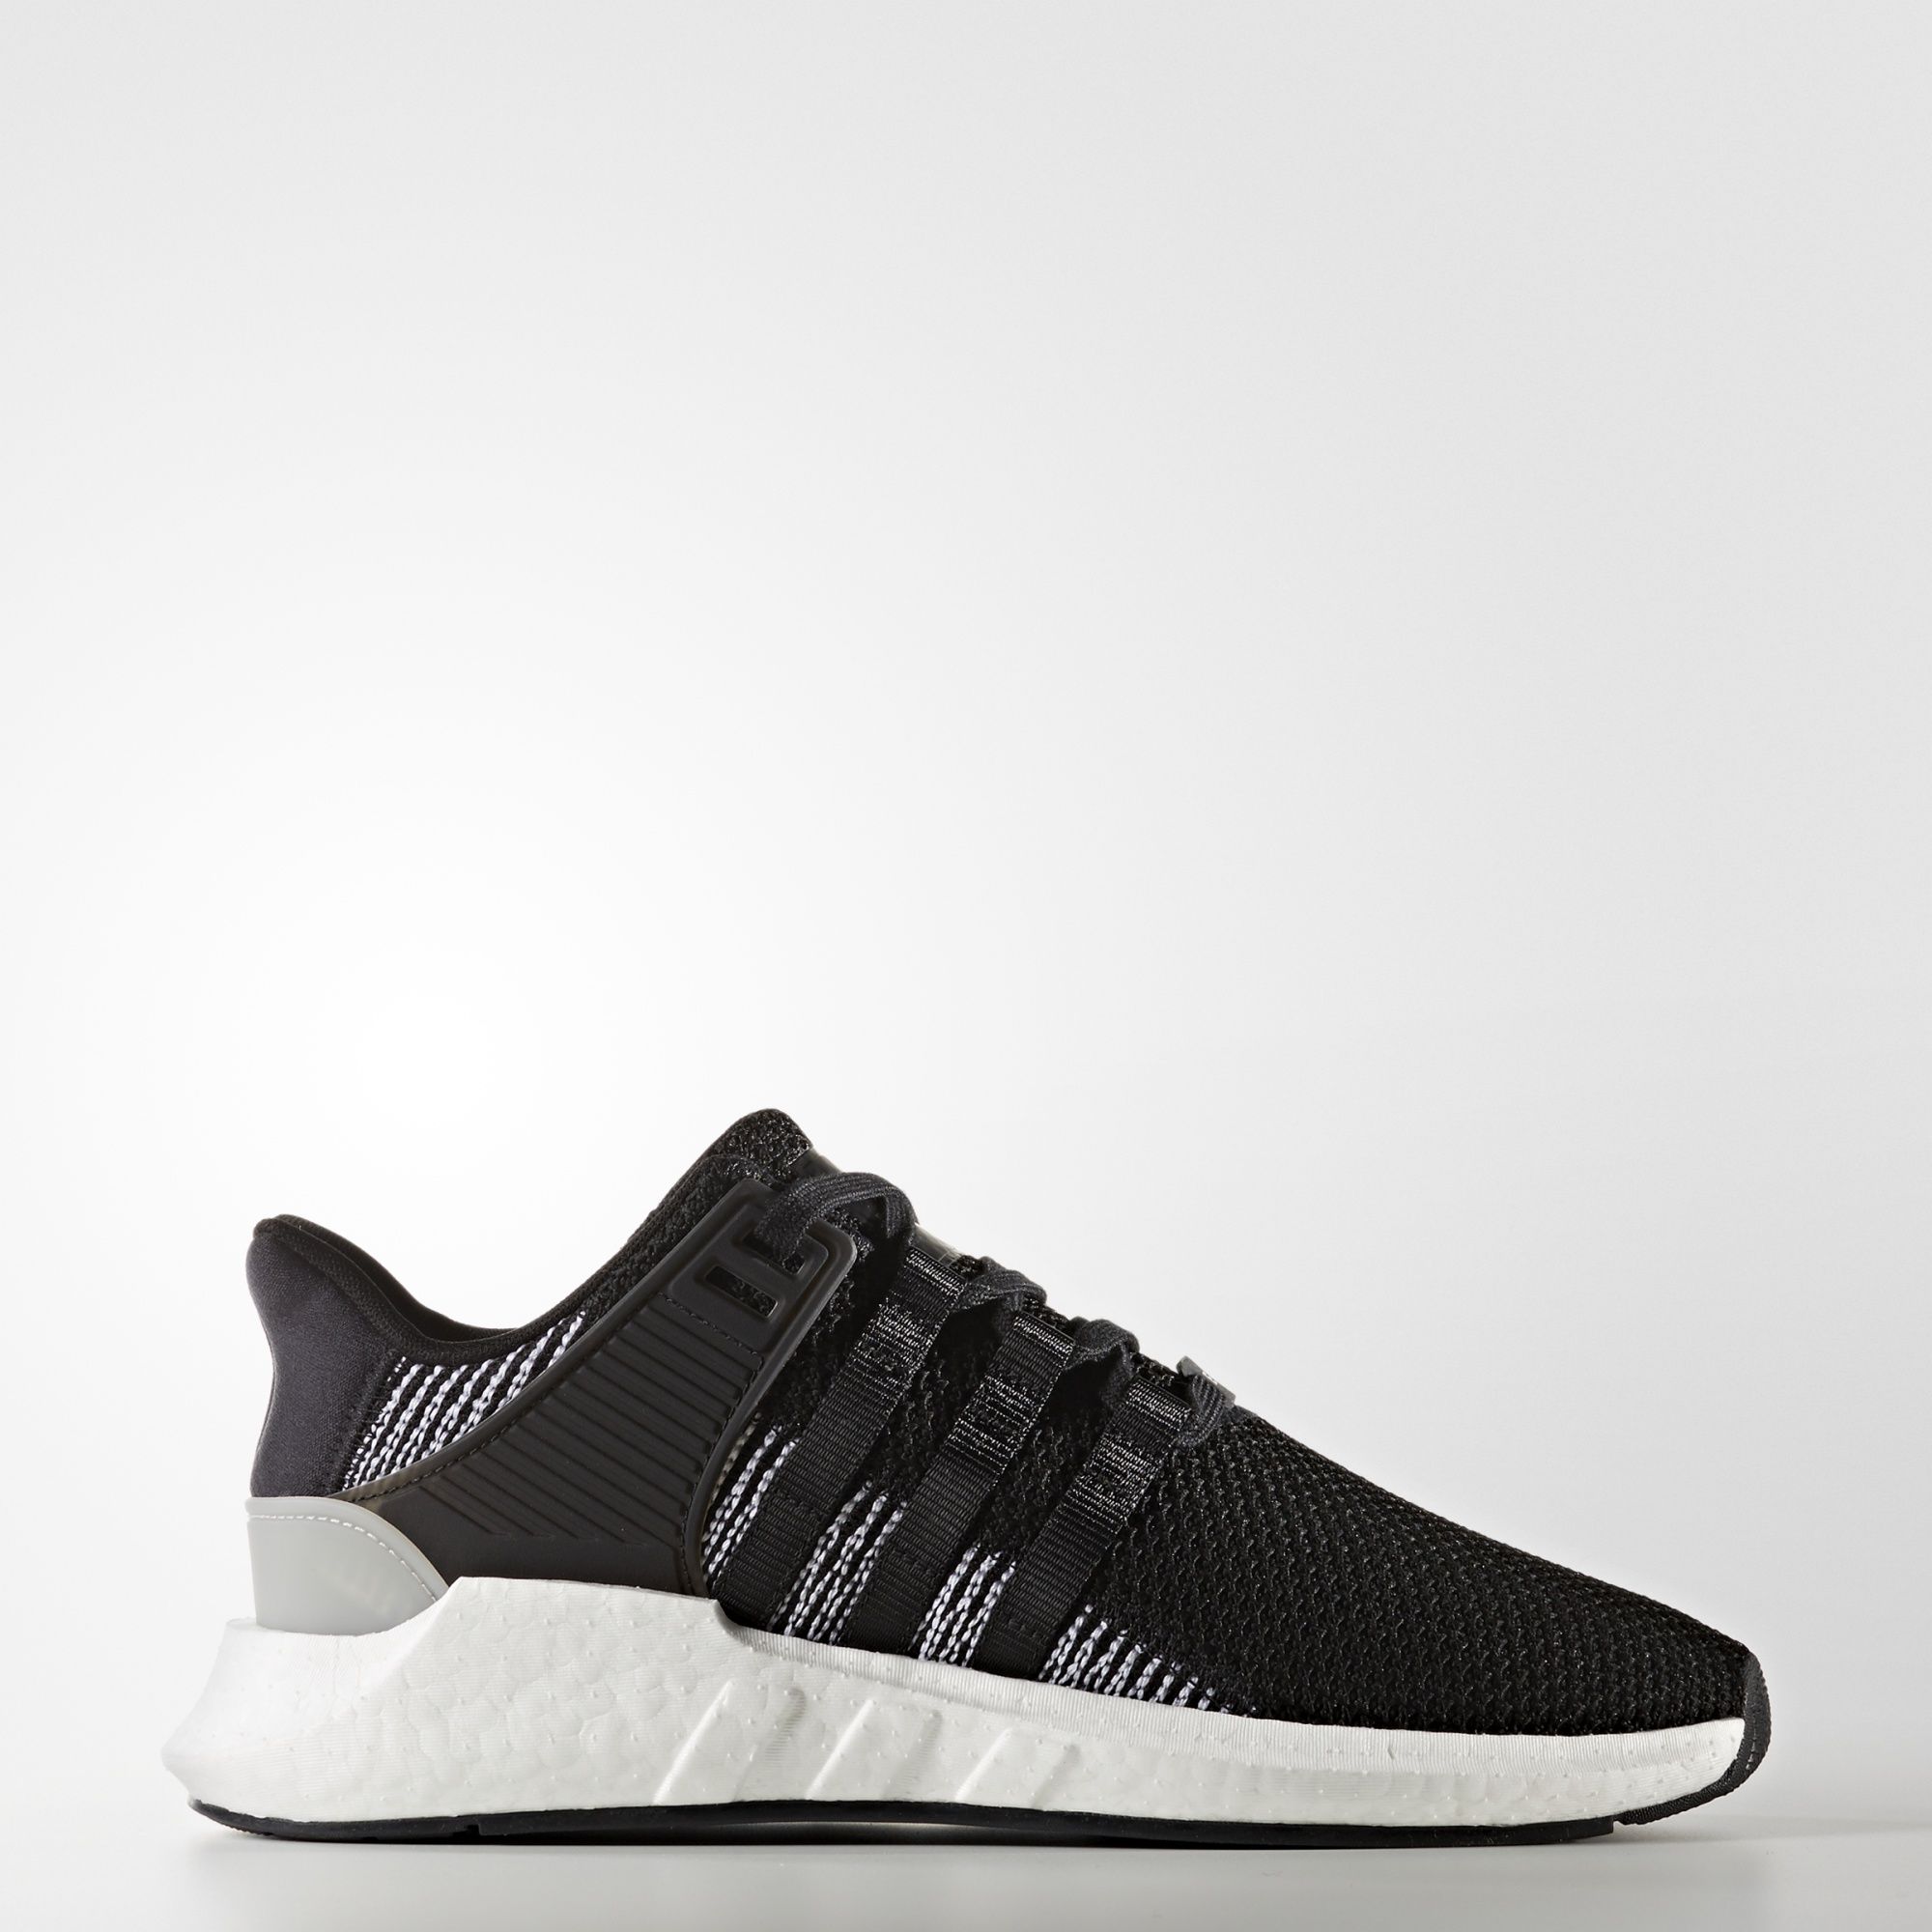 adidas-eqt-support-9317-textile-core-black-running-white-2